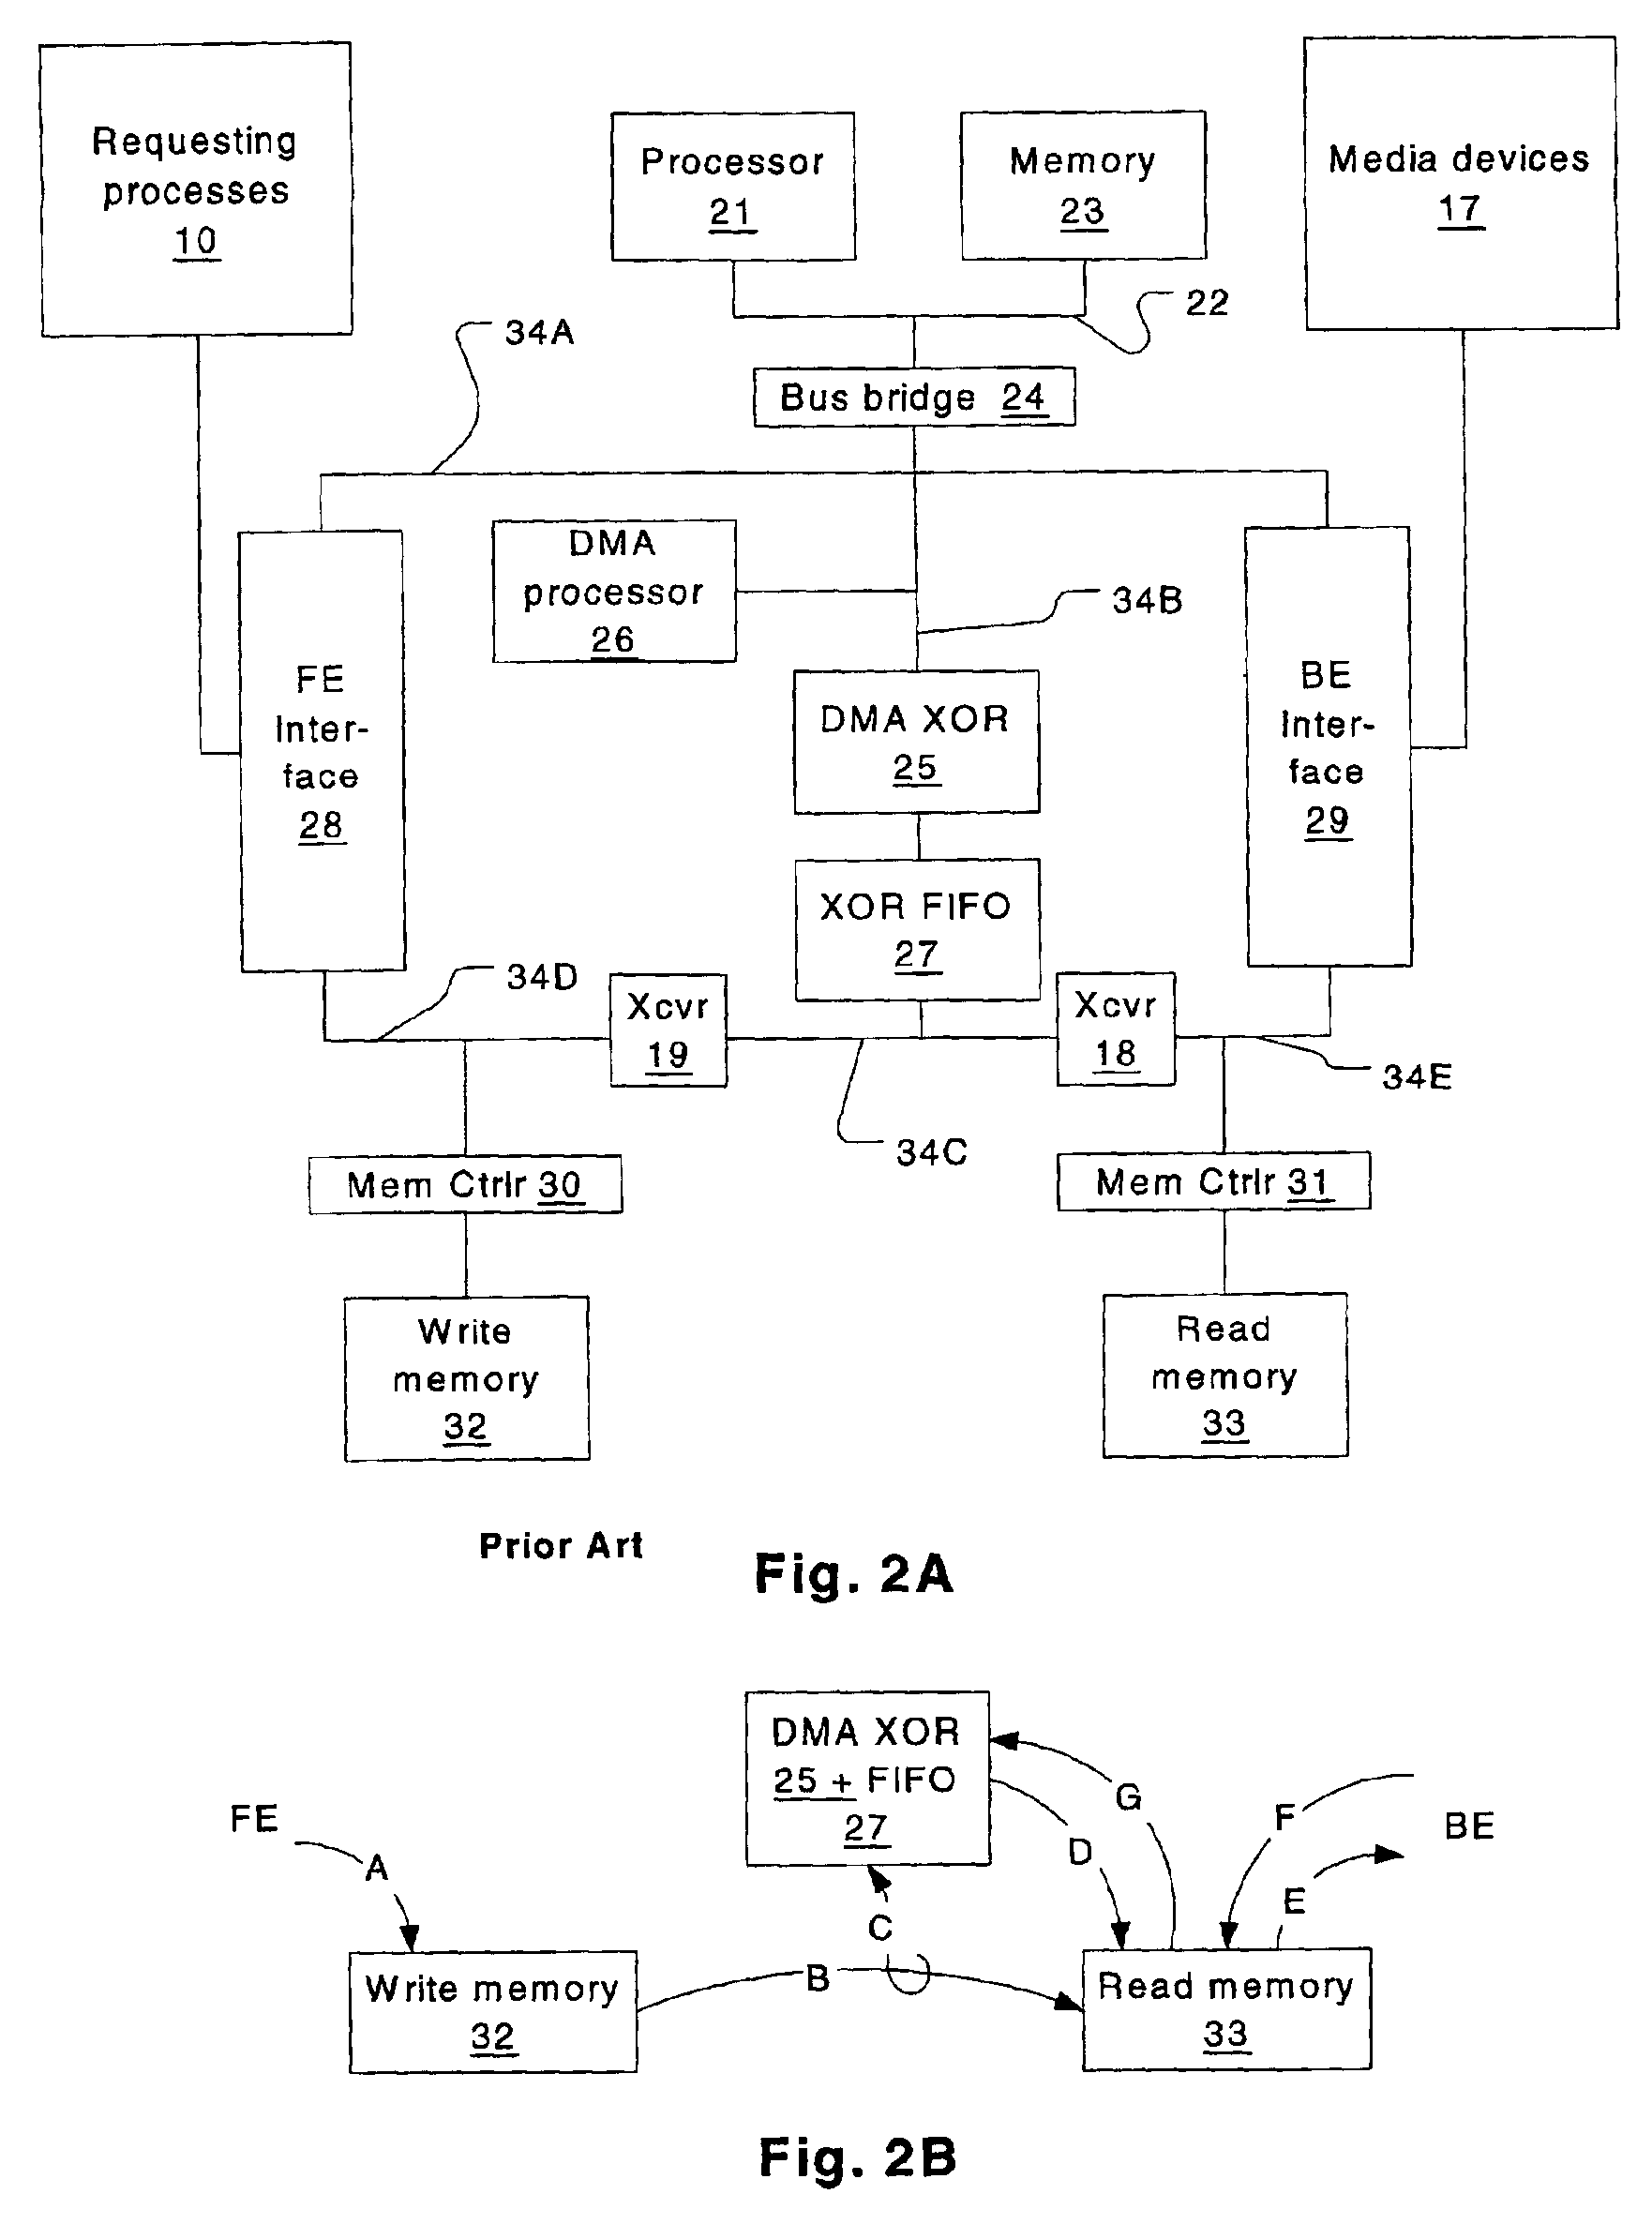 Communications architecture for a high throughput storage processor providing user data priority on shared channels